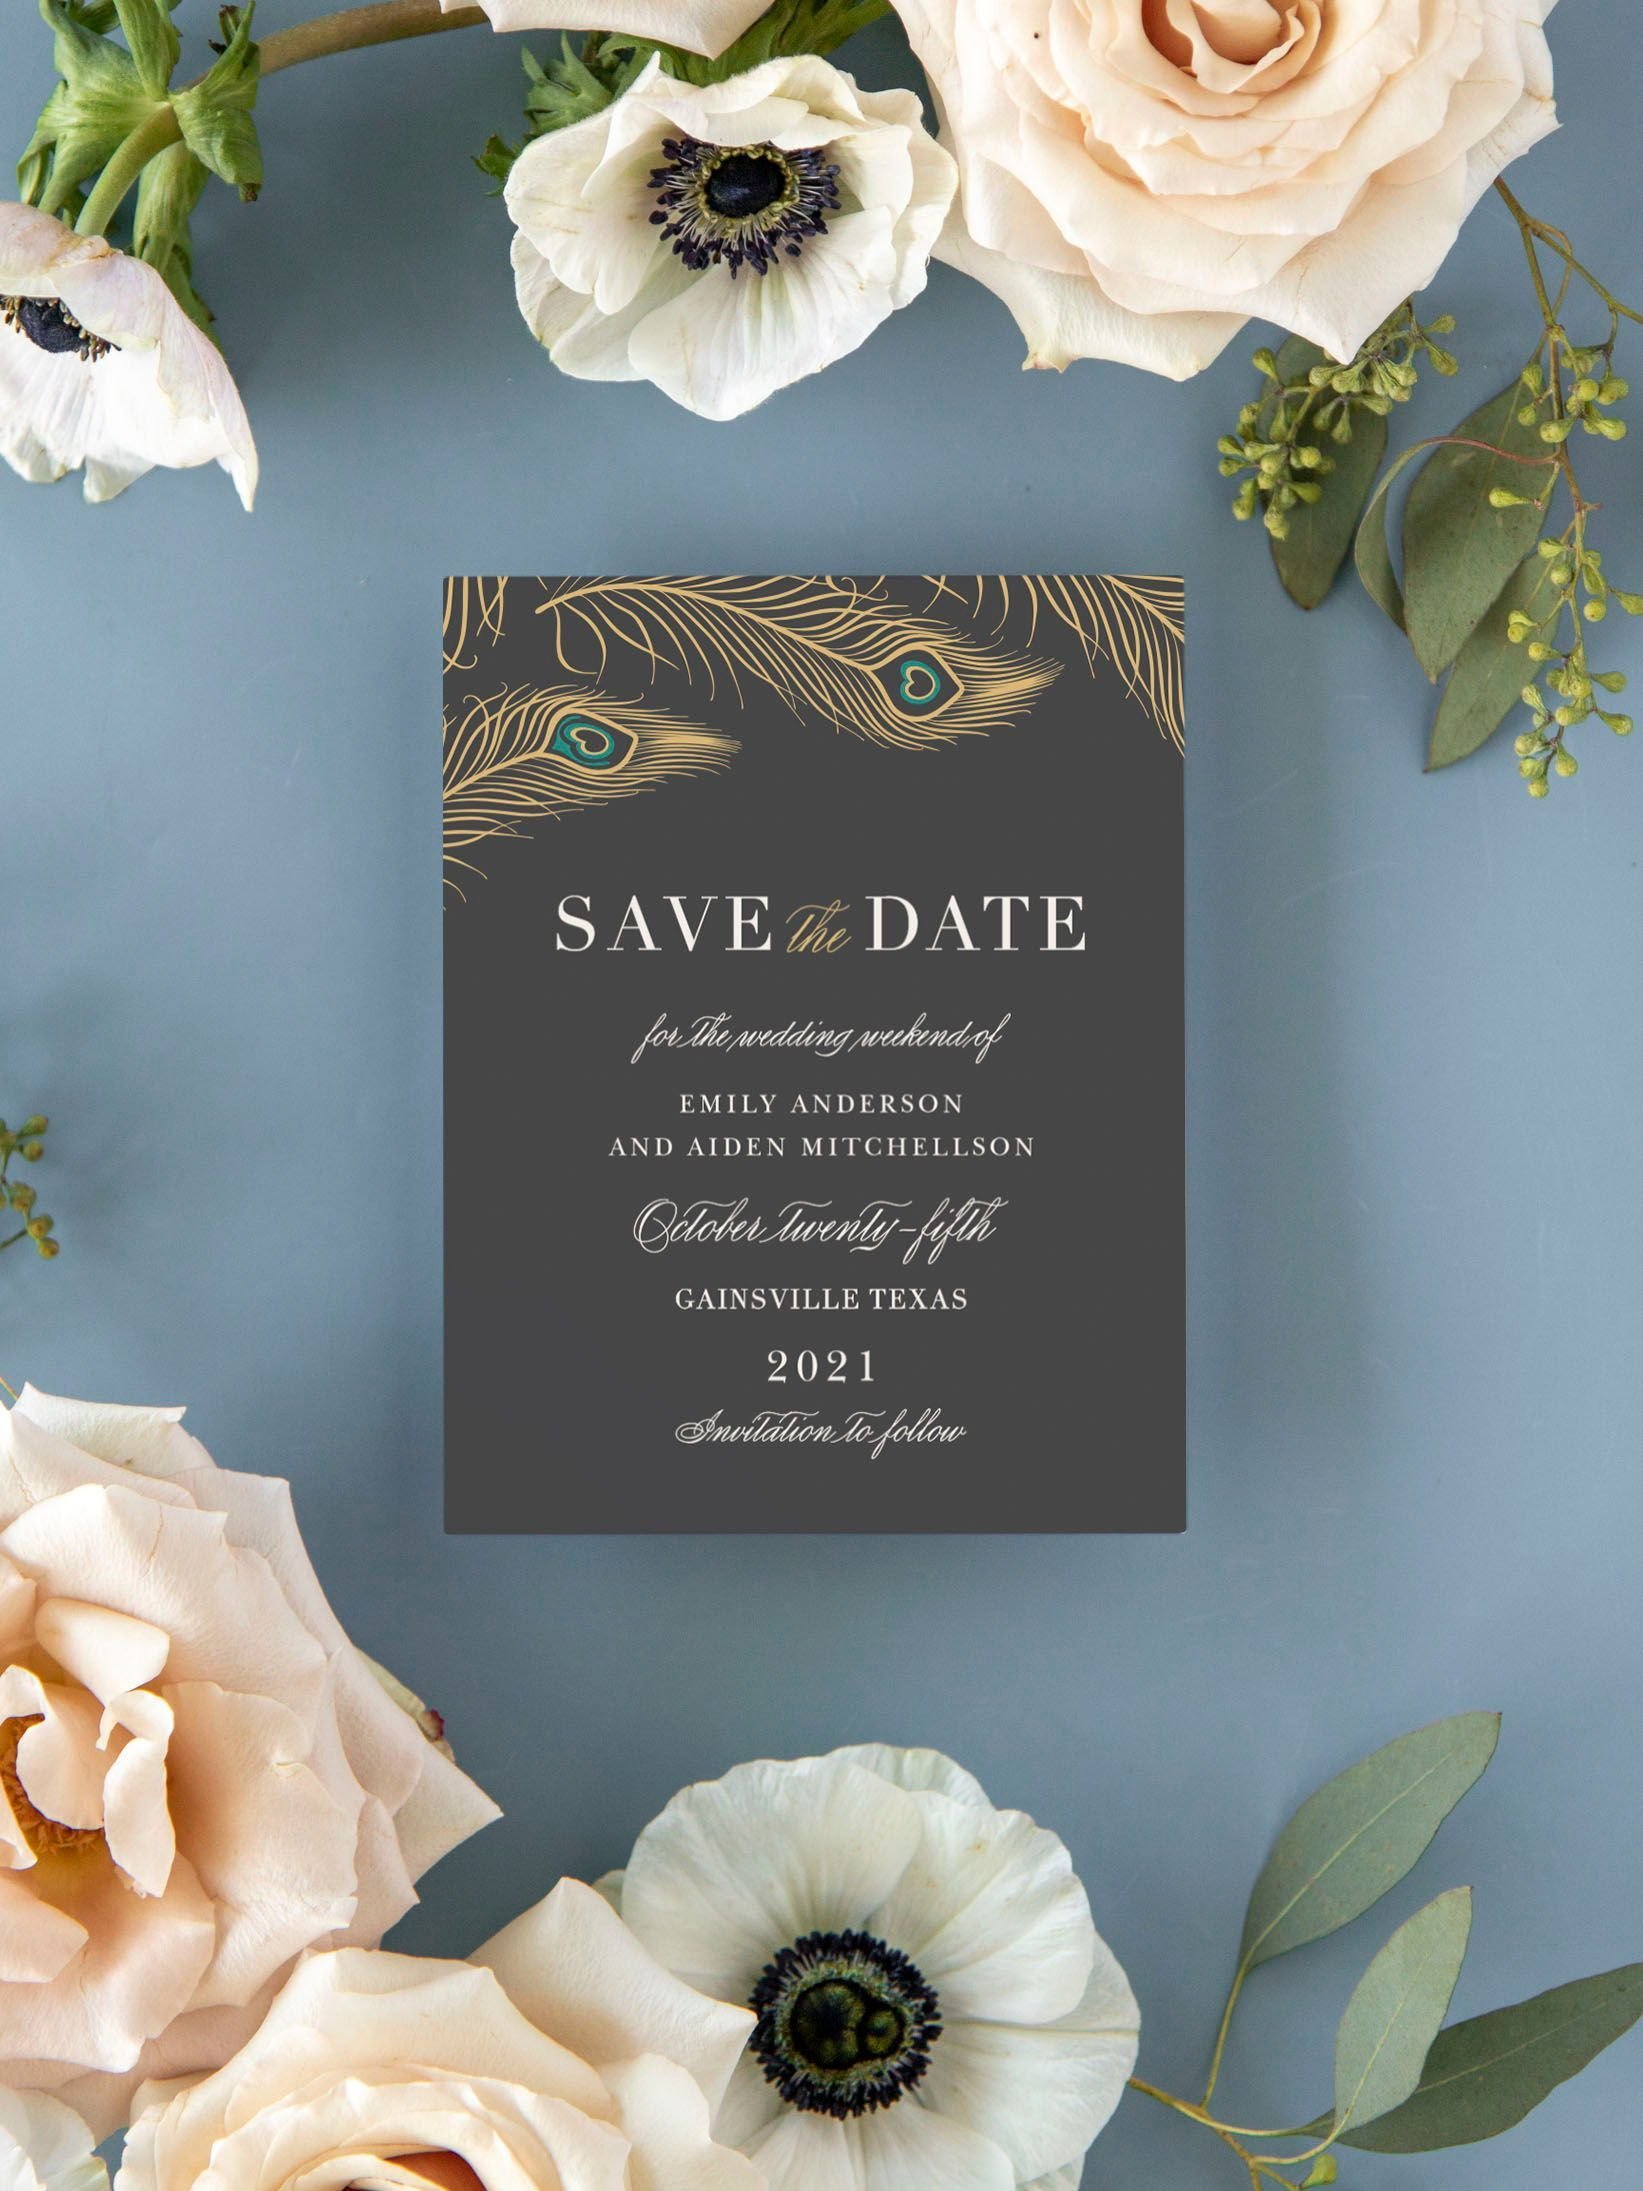 Peacock Feather Save the Date Cards _ Save the Date Magnets _ Save the Date Card Ideas.jpeg